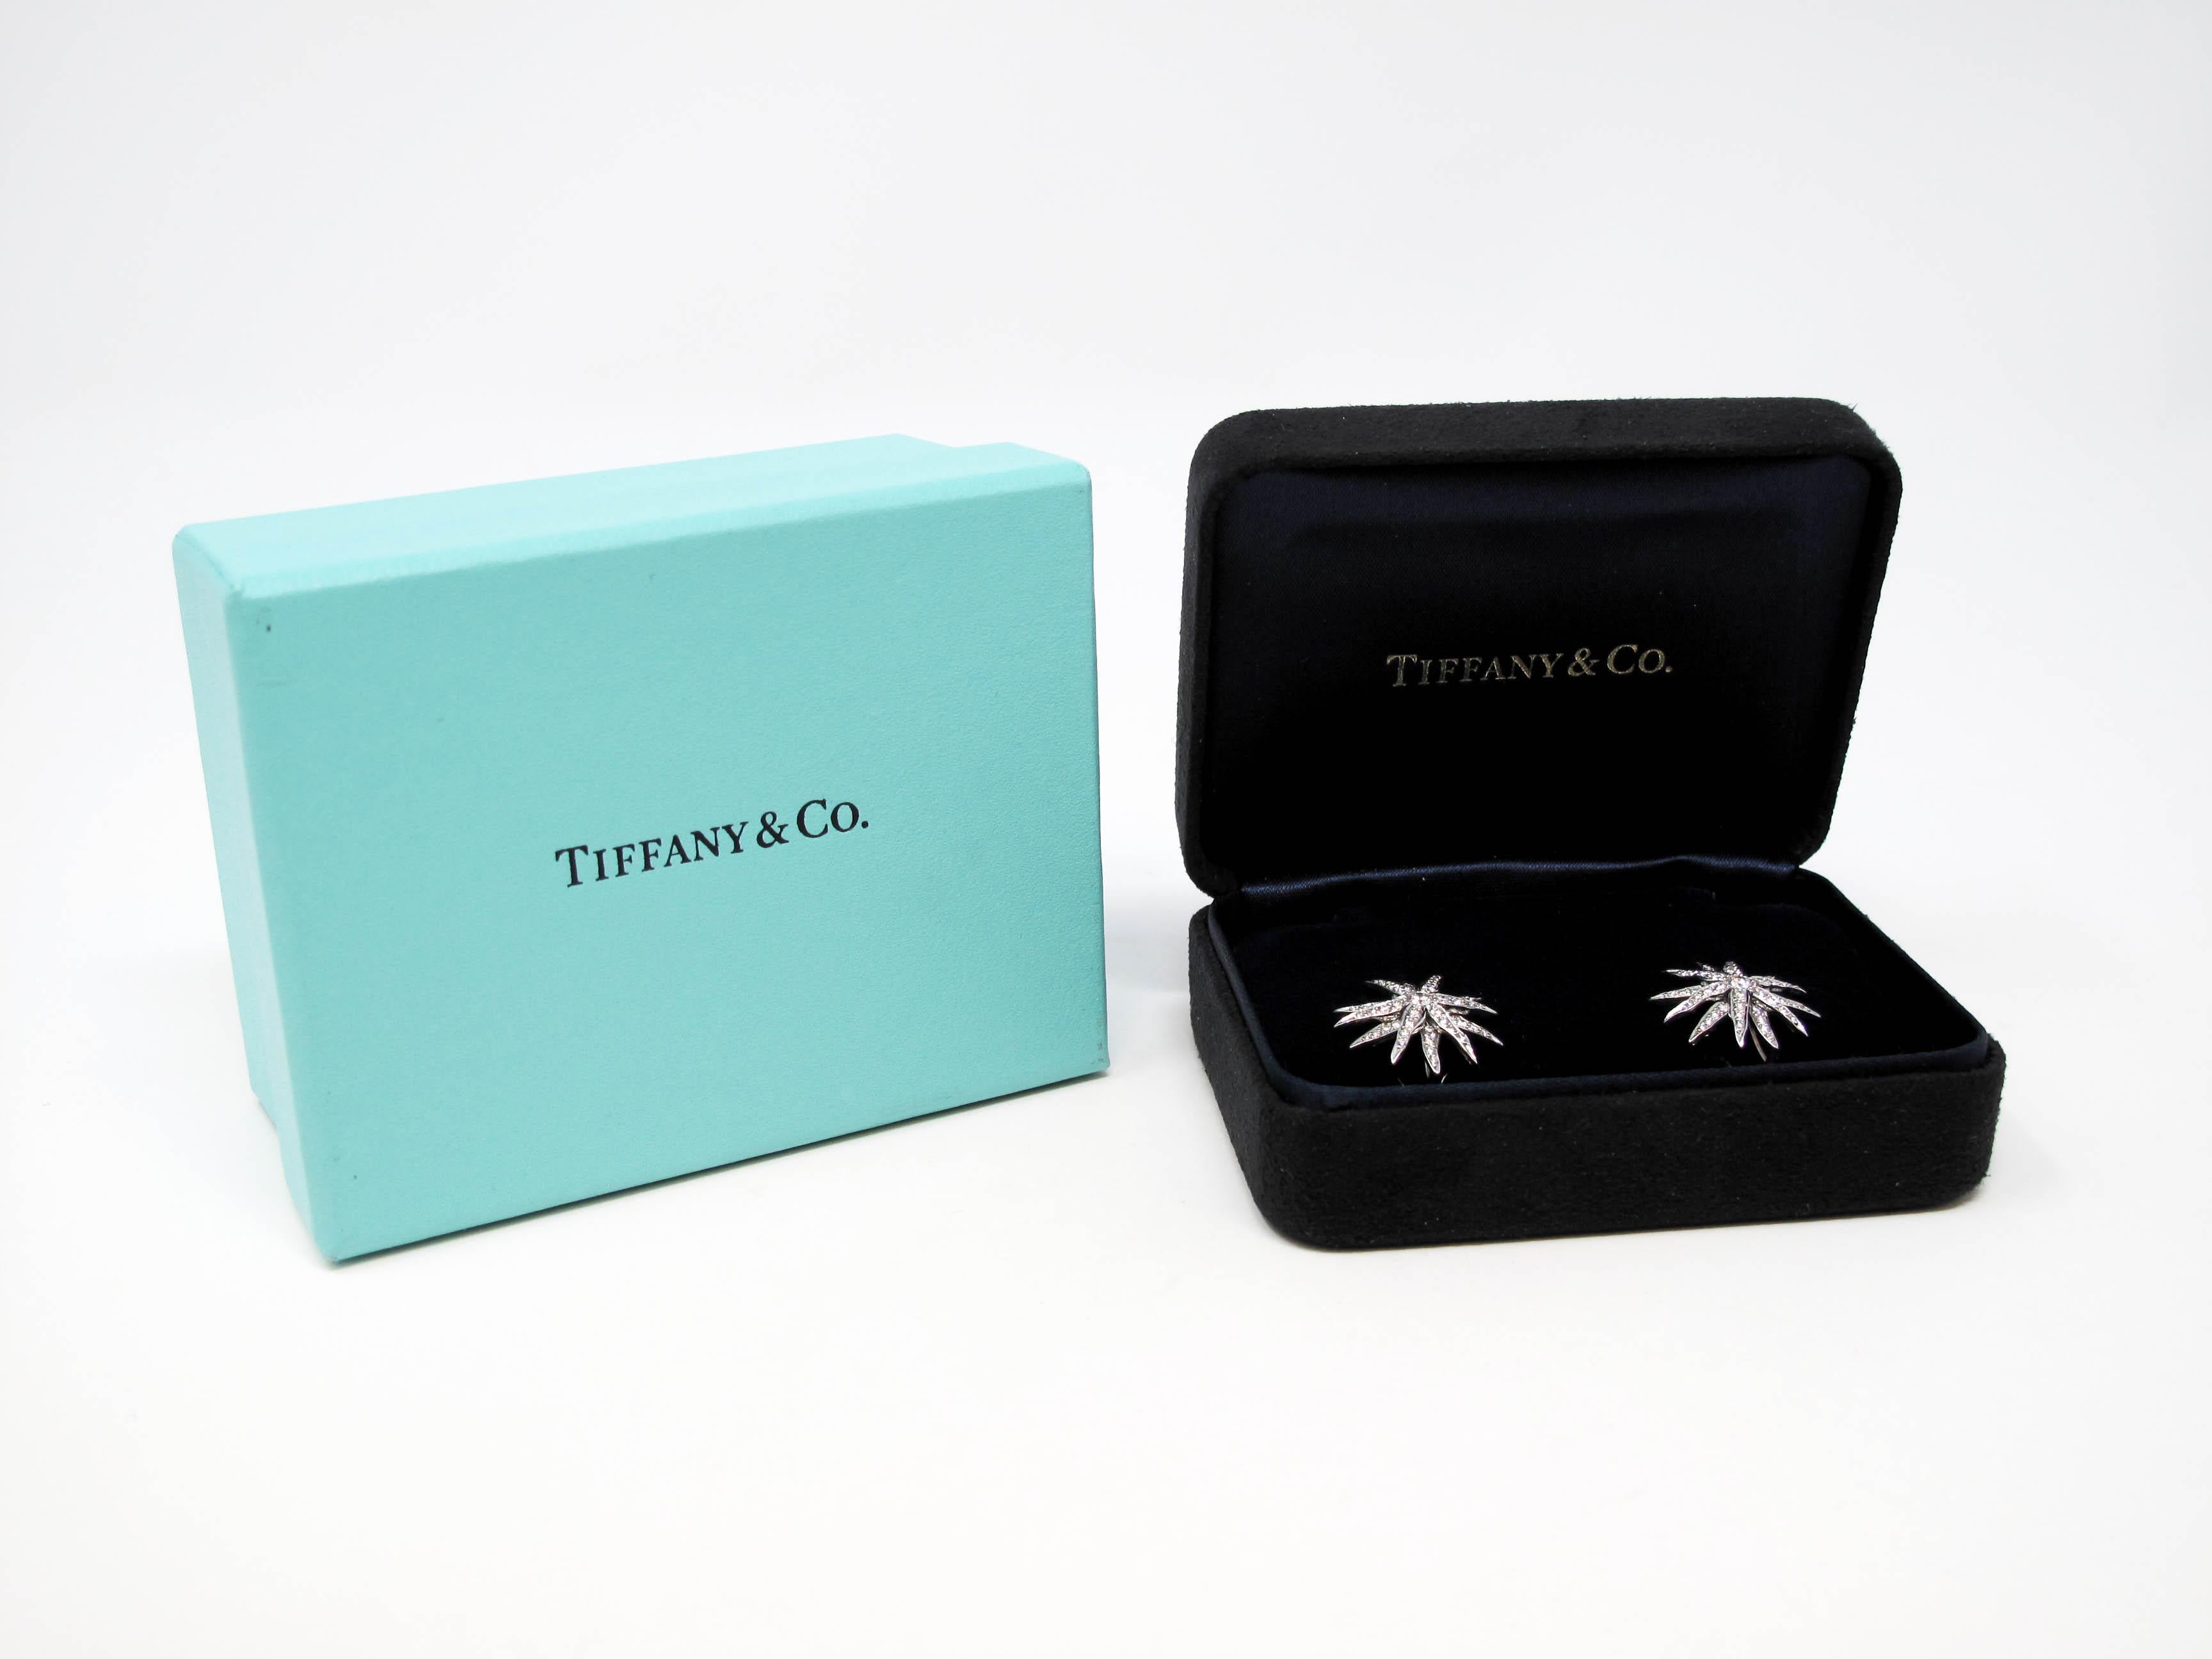 These brilliant diamond earrings are absolutely bursting with sparkle! Part of the Tiffany & Co. Lace Collection, these incredible Sunburst earrings feature icy white diamond center stones accented by exploding bursts of glittering pave diamonds.